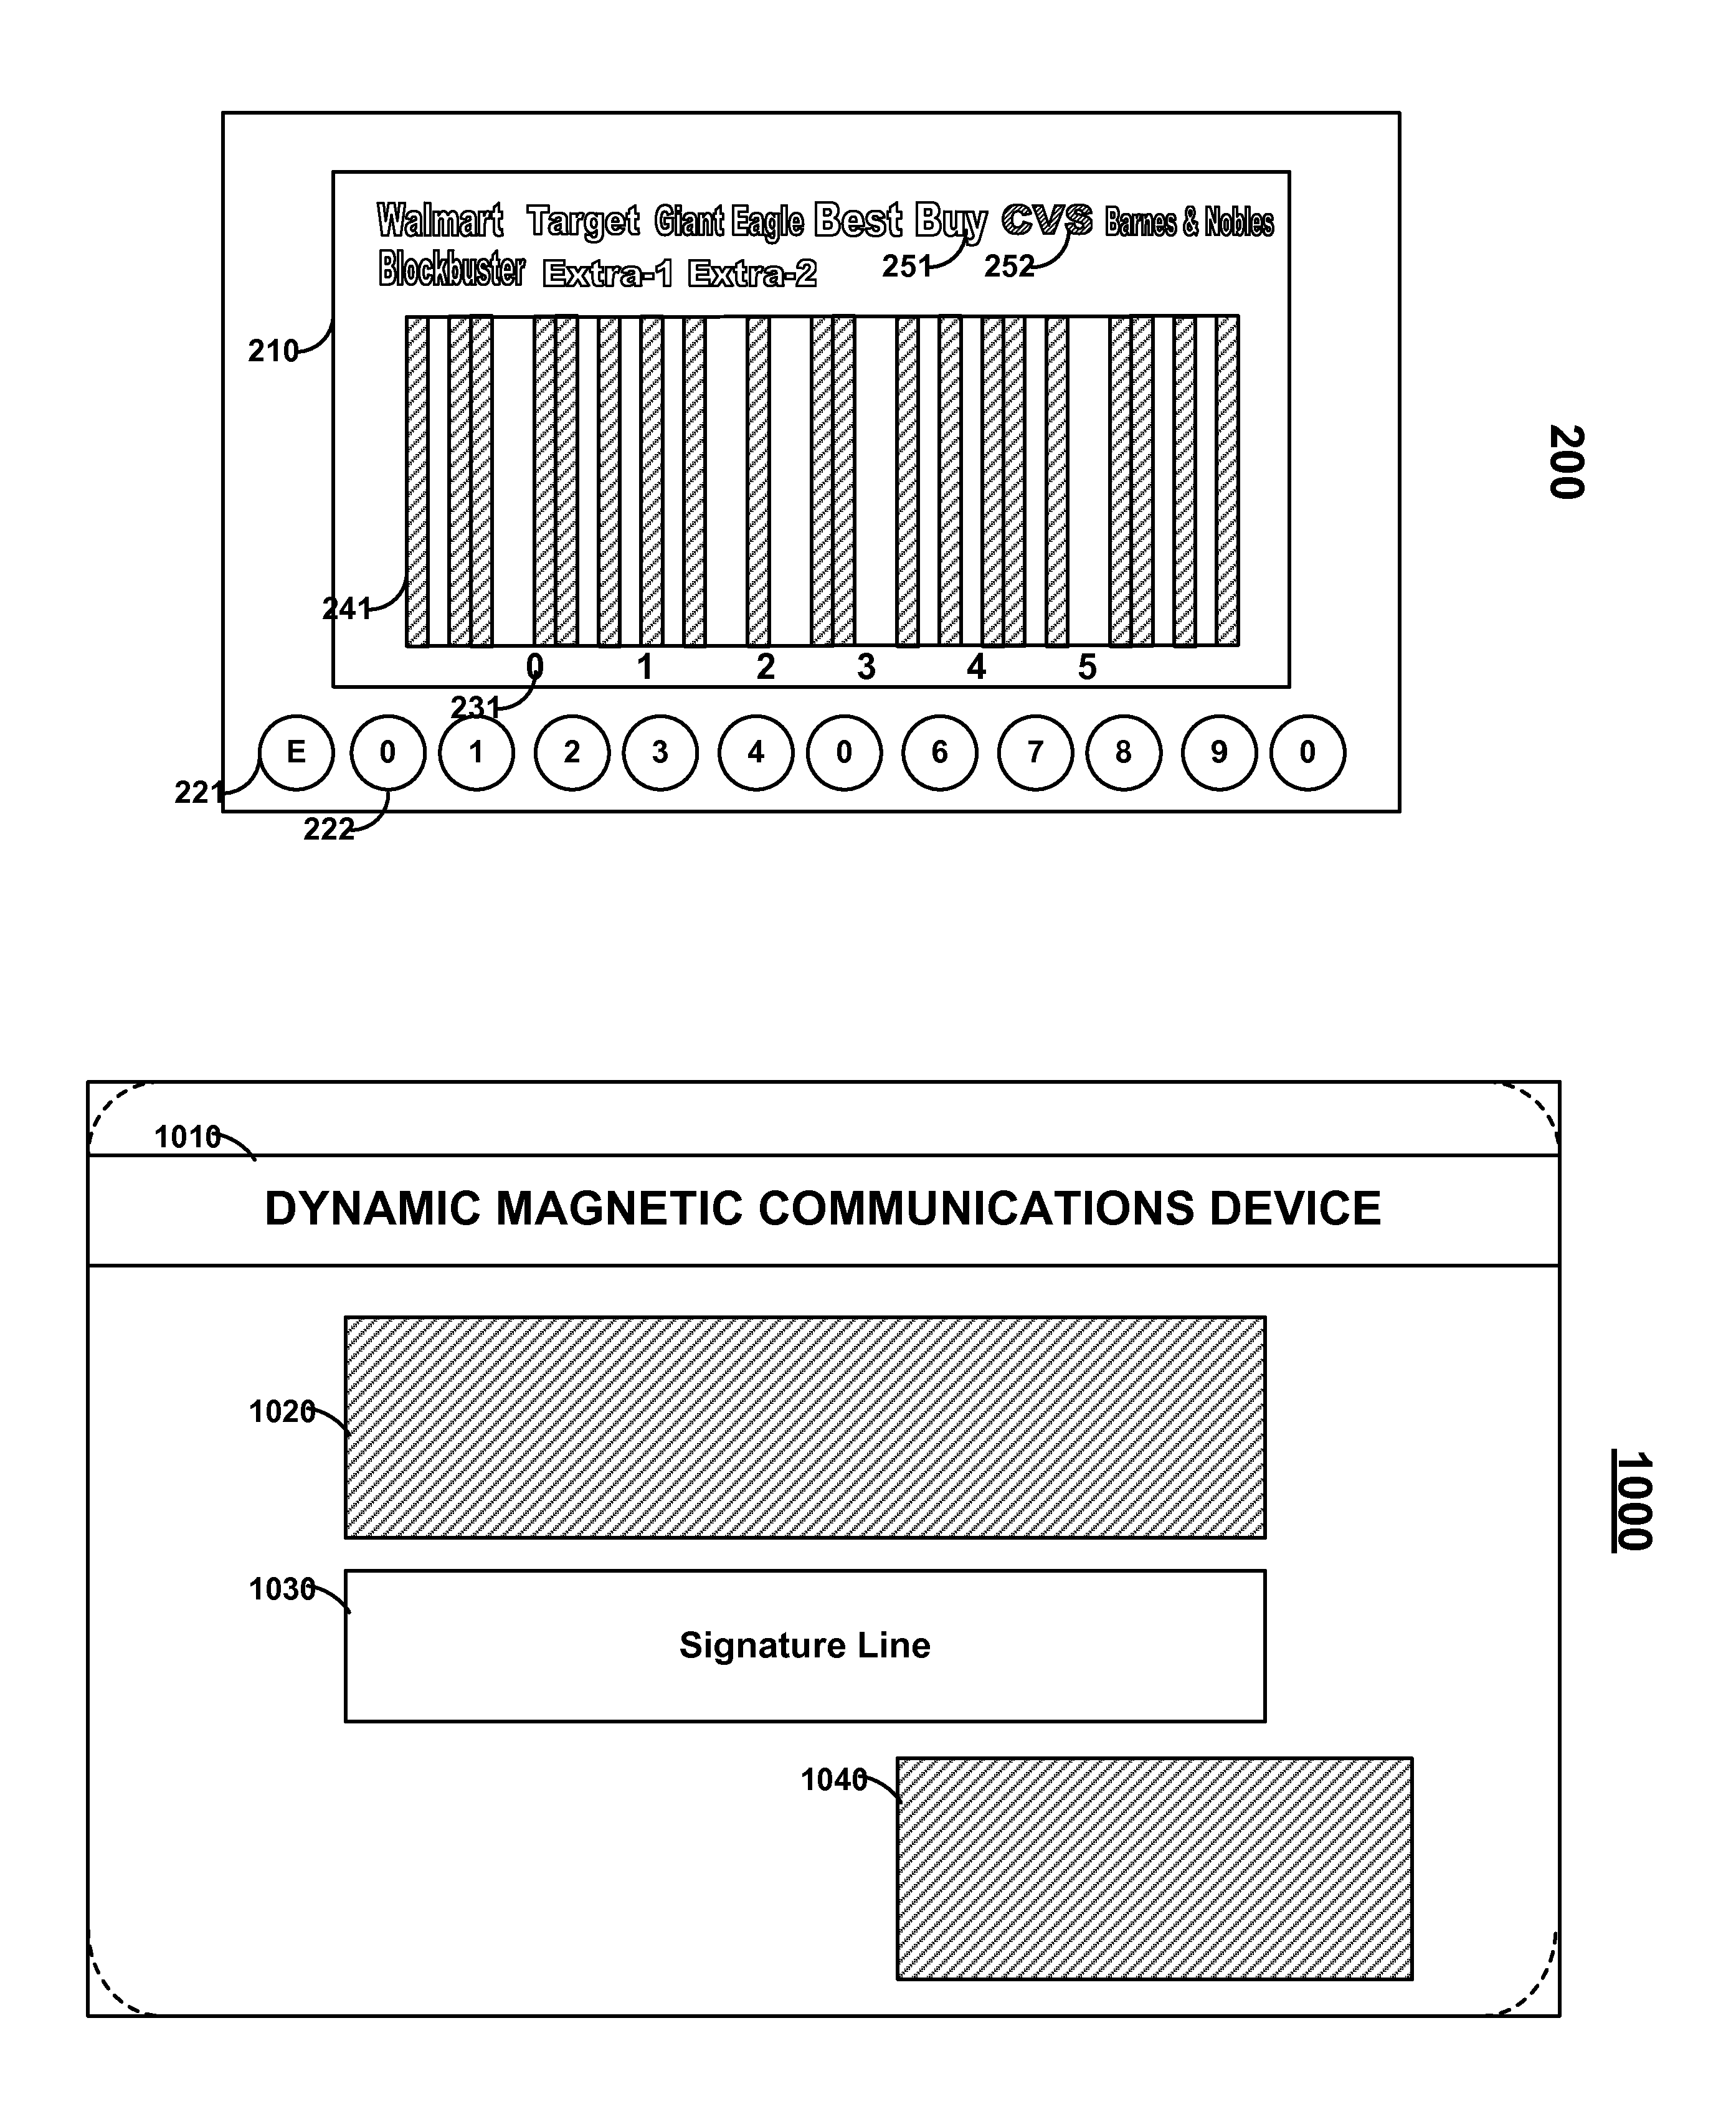 Payment cards and devices for displaying barcodes